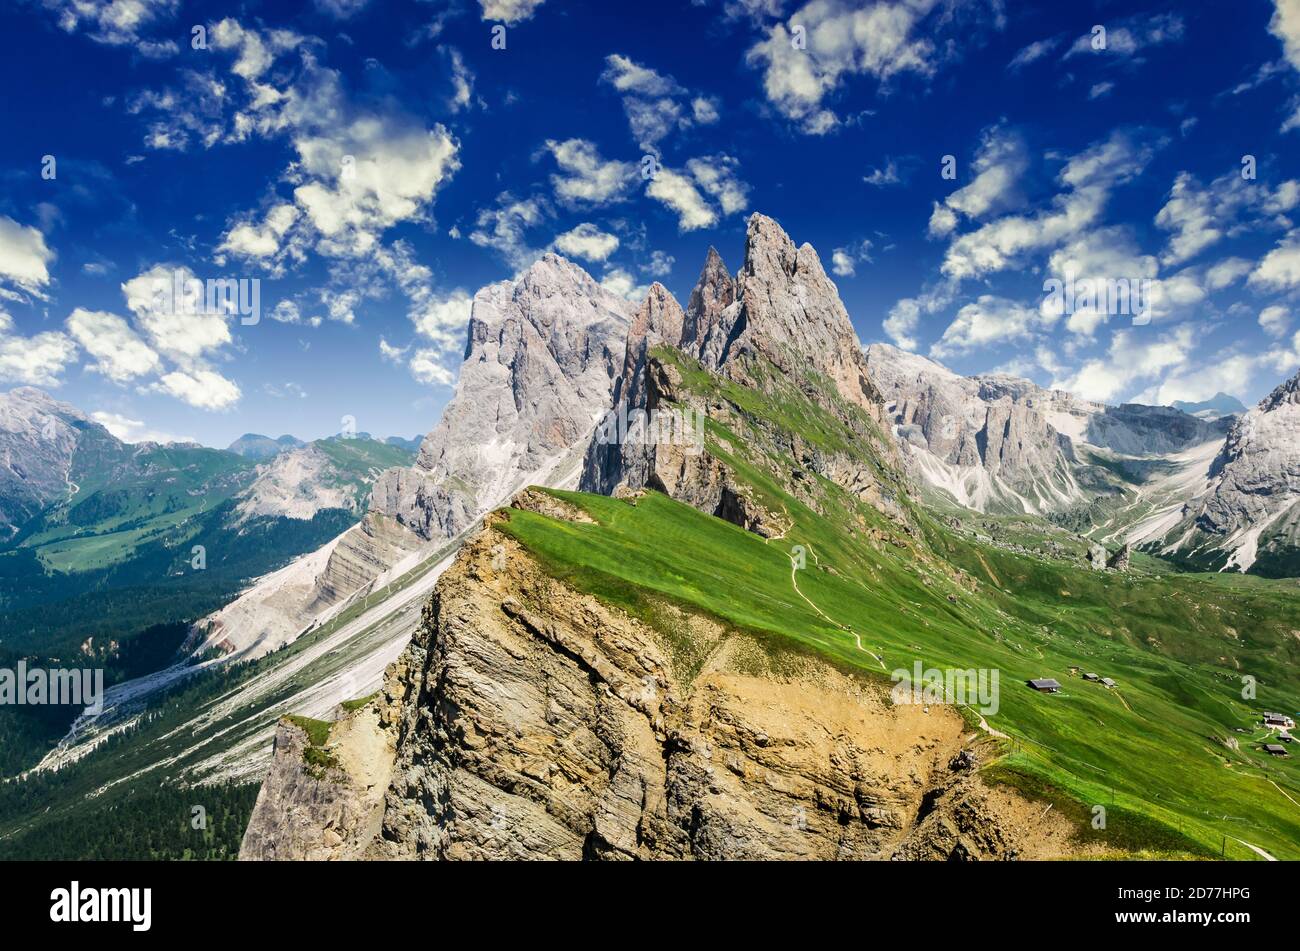 Gruppo delle Odle, view from Seceda. Puez Odle massif in Dolomites  mountains, Italy, South Tyrol Alps, Alto Adige, Val Gardena, Geislergruppe  Stock Photo - Alamy